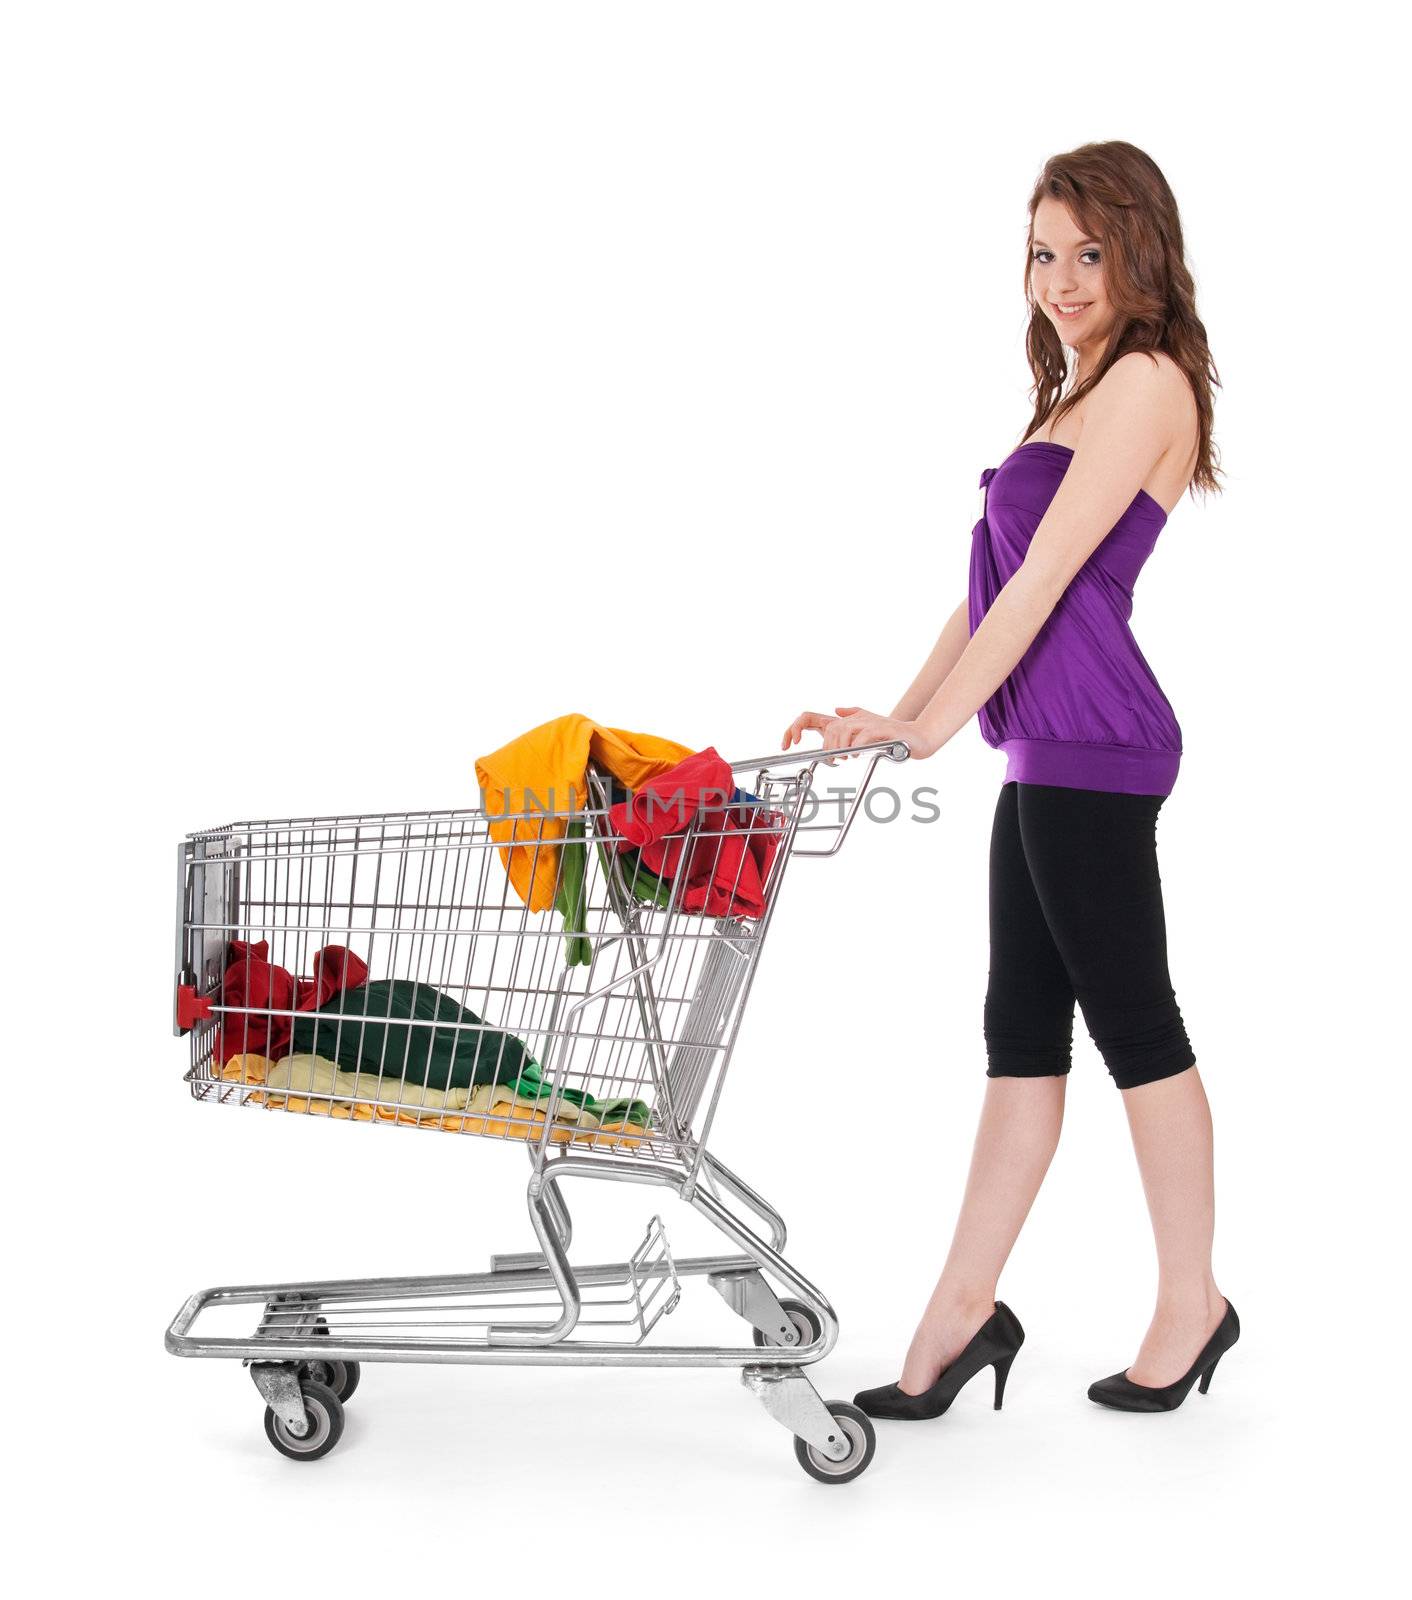 Pretty girl with shopping cart buying colorful clothing, isolated on white.